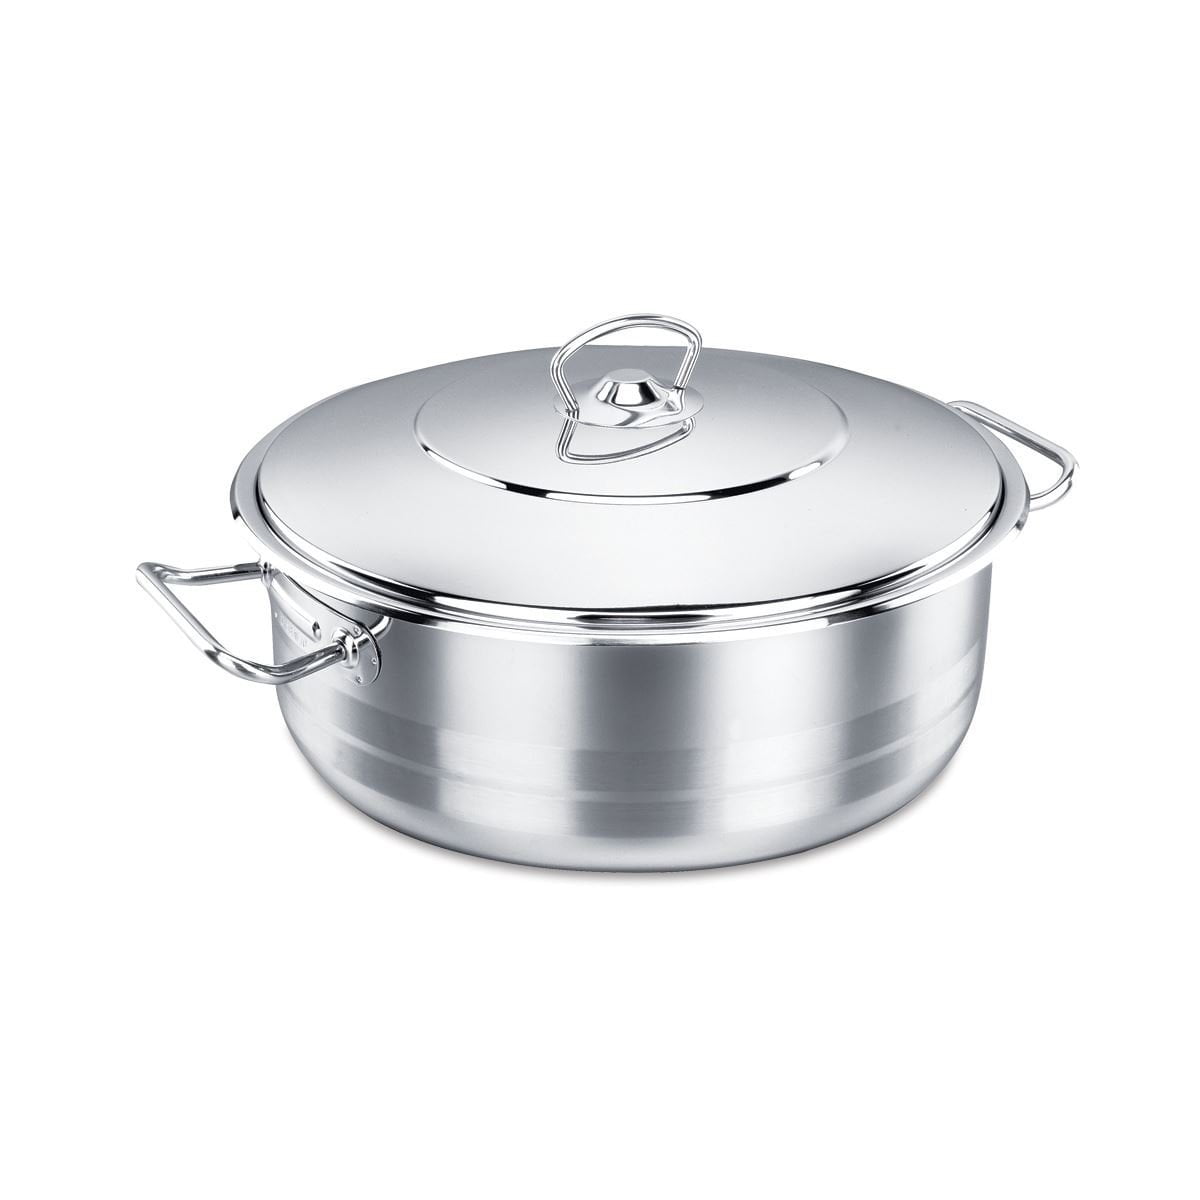 Tefal ILLICO Stainless Steel Induction Stockpot 5.7 qt Dishwasher Oven Safe PFOA 